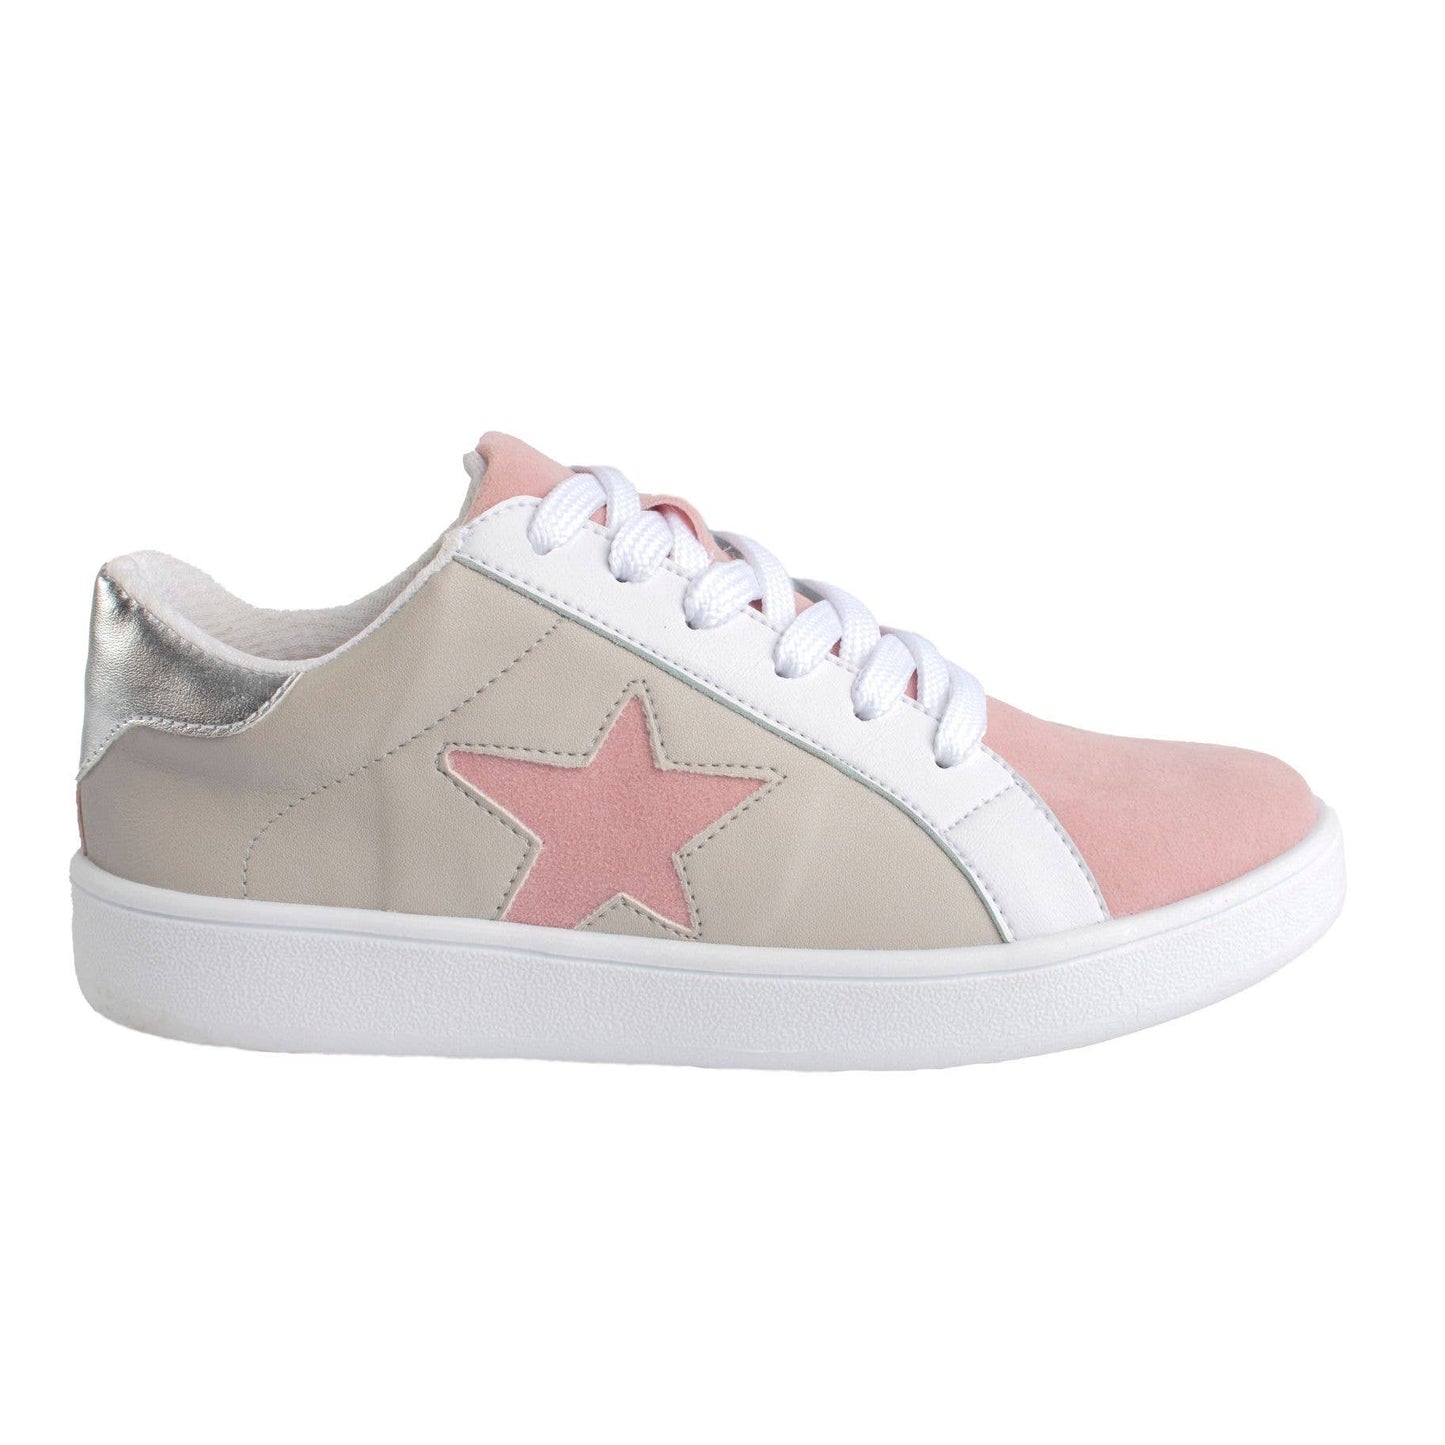 Maker's Shoes - Pink/Gray MIEL 31 Sneakers